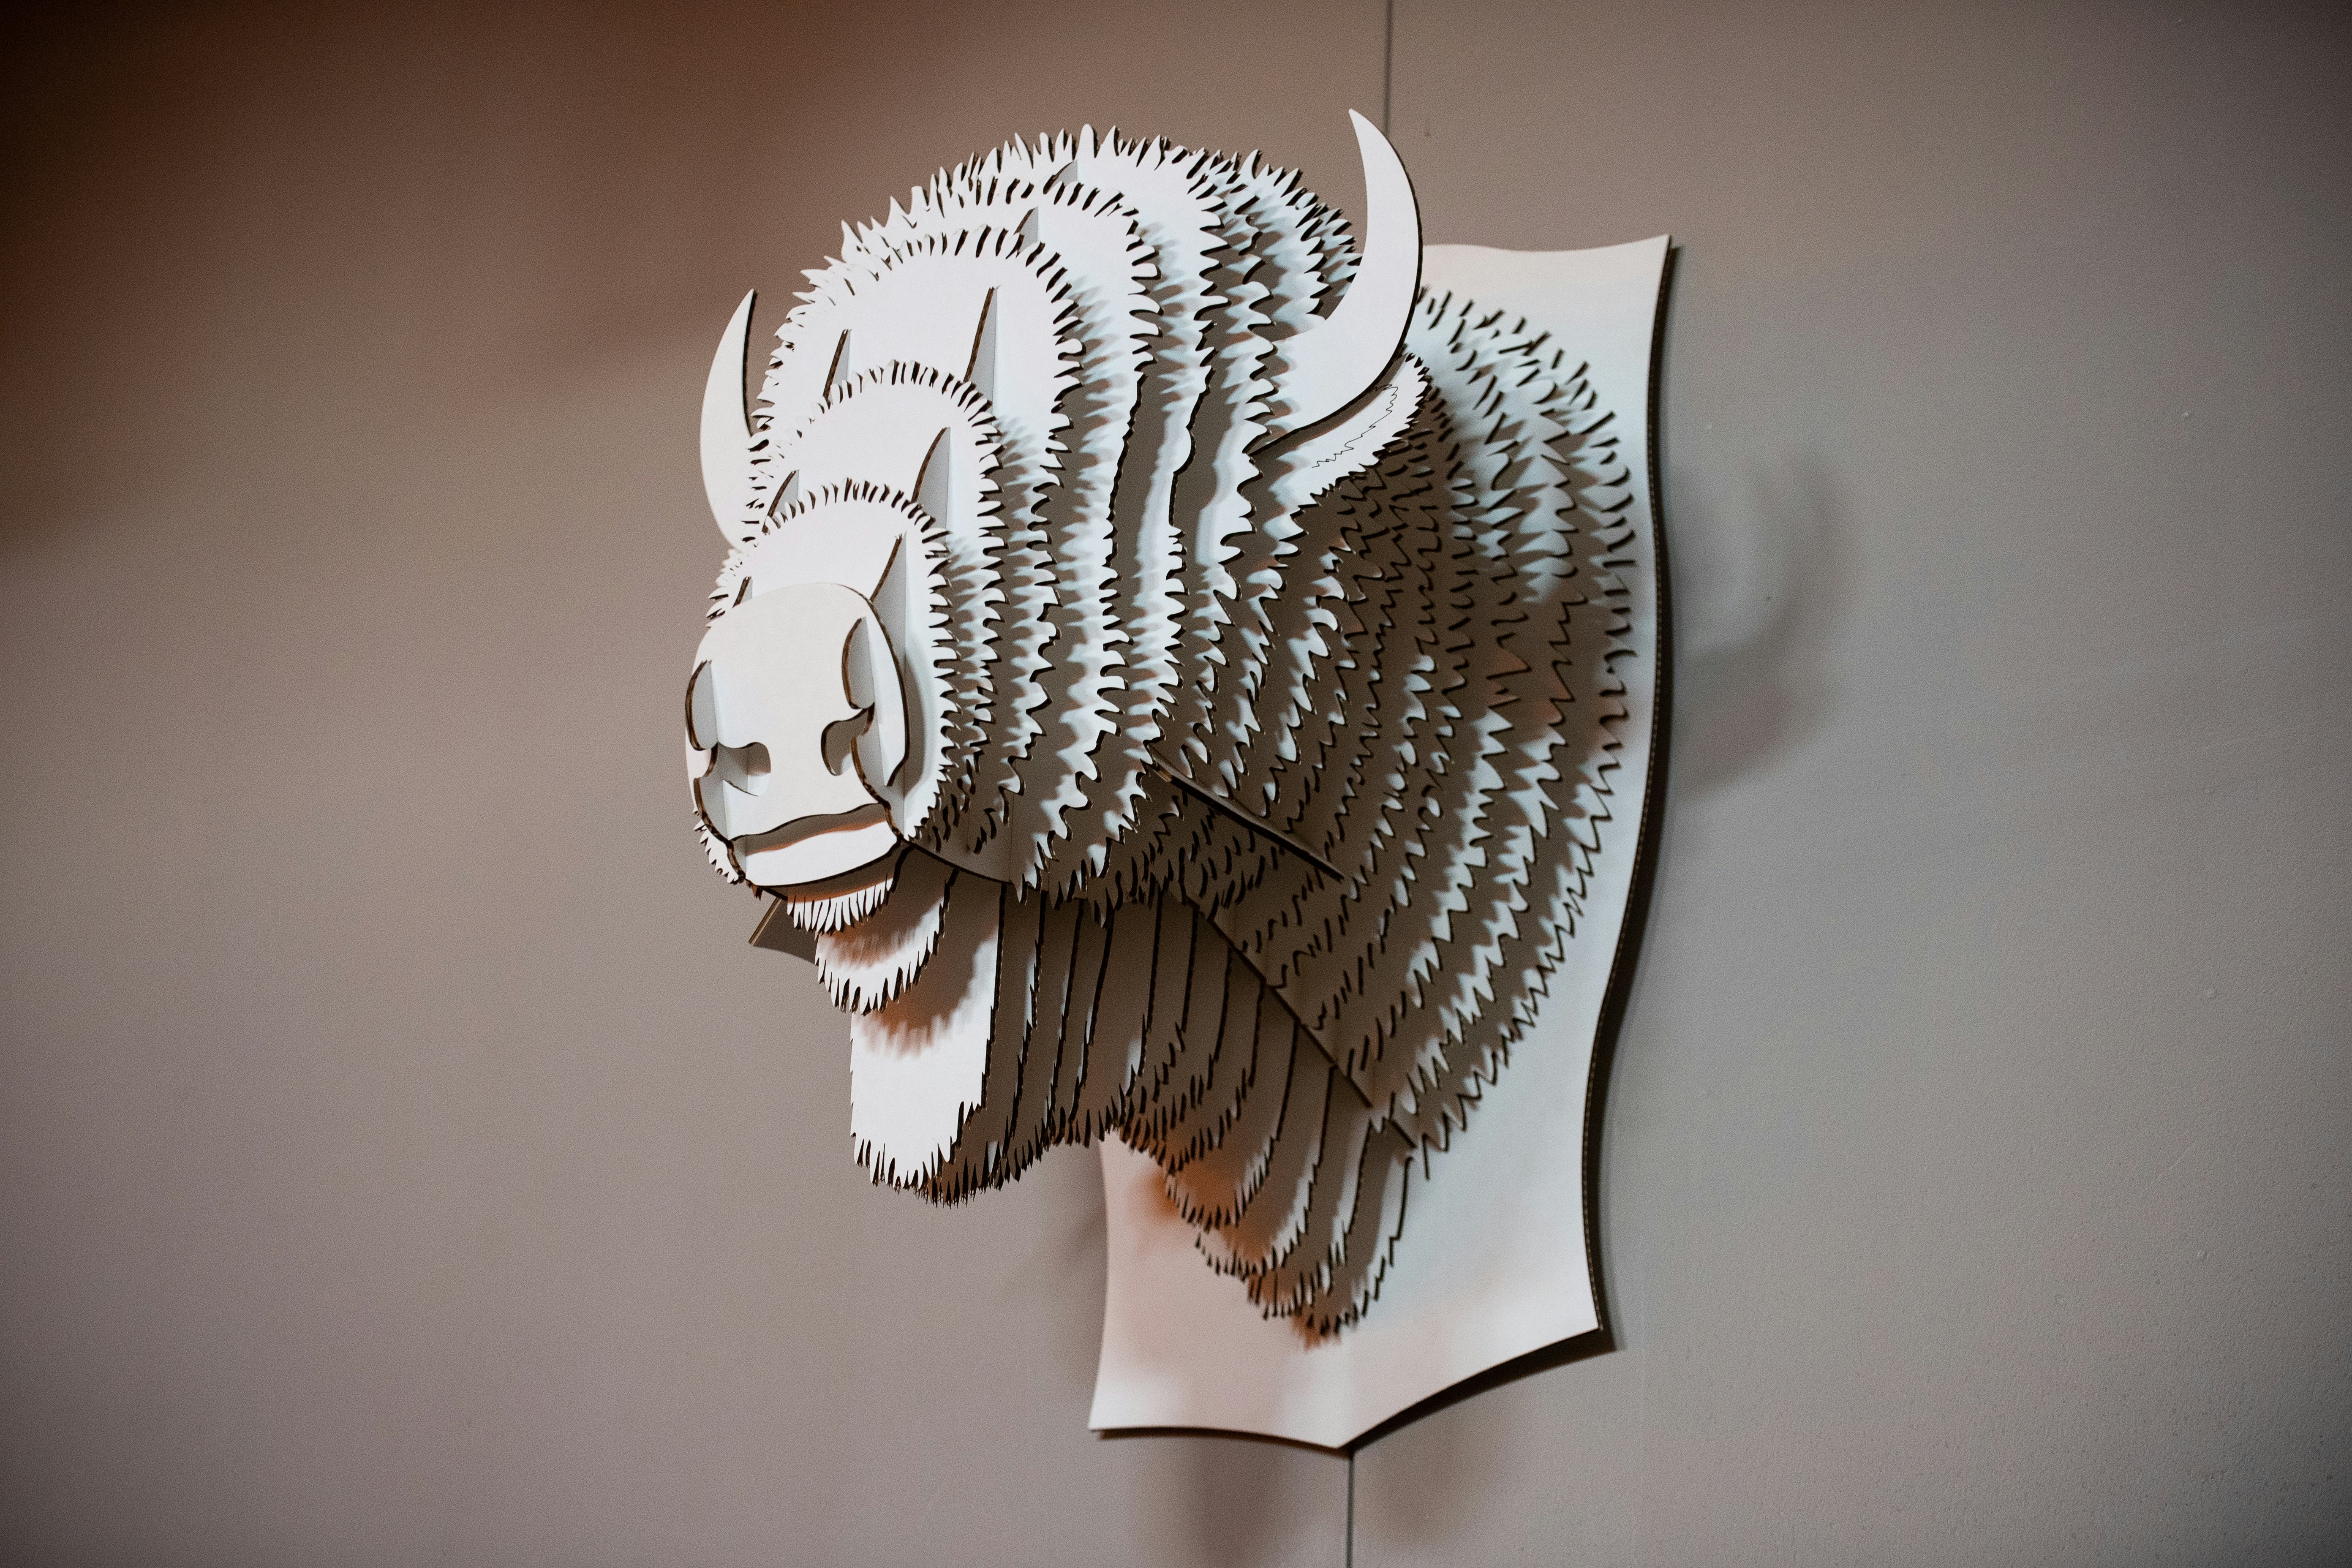 A white card buffalo sculpture is displayed inside the Bow and Arrow Brewery in Albuquerque, New Mexico